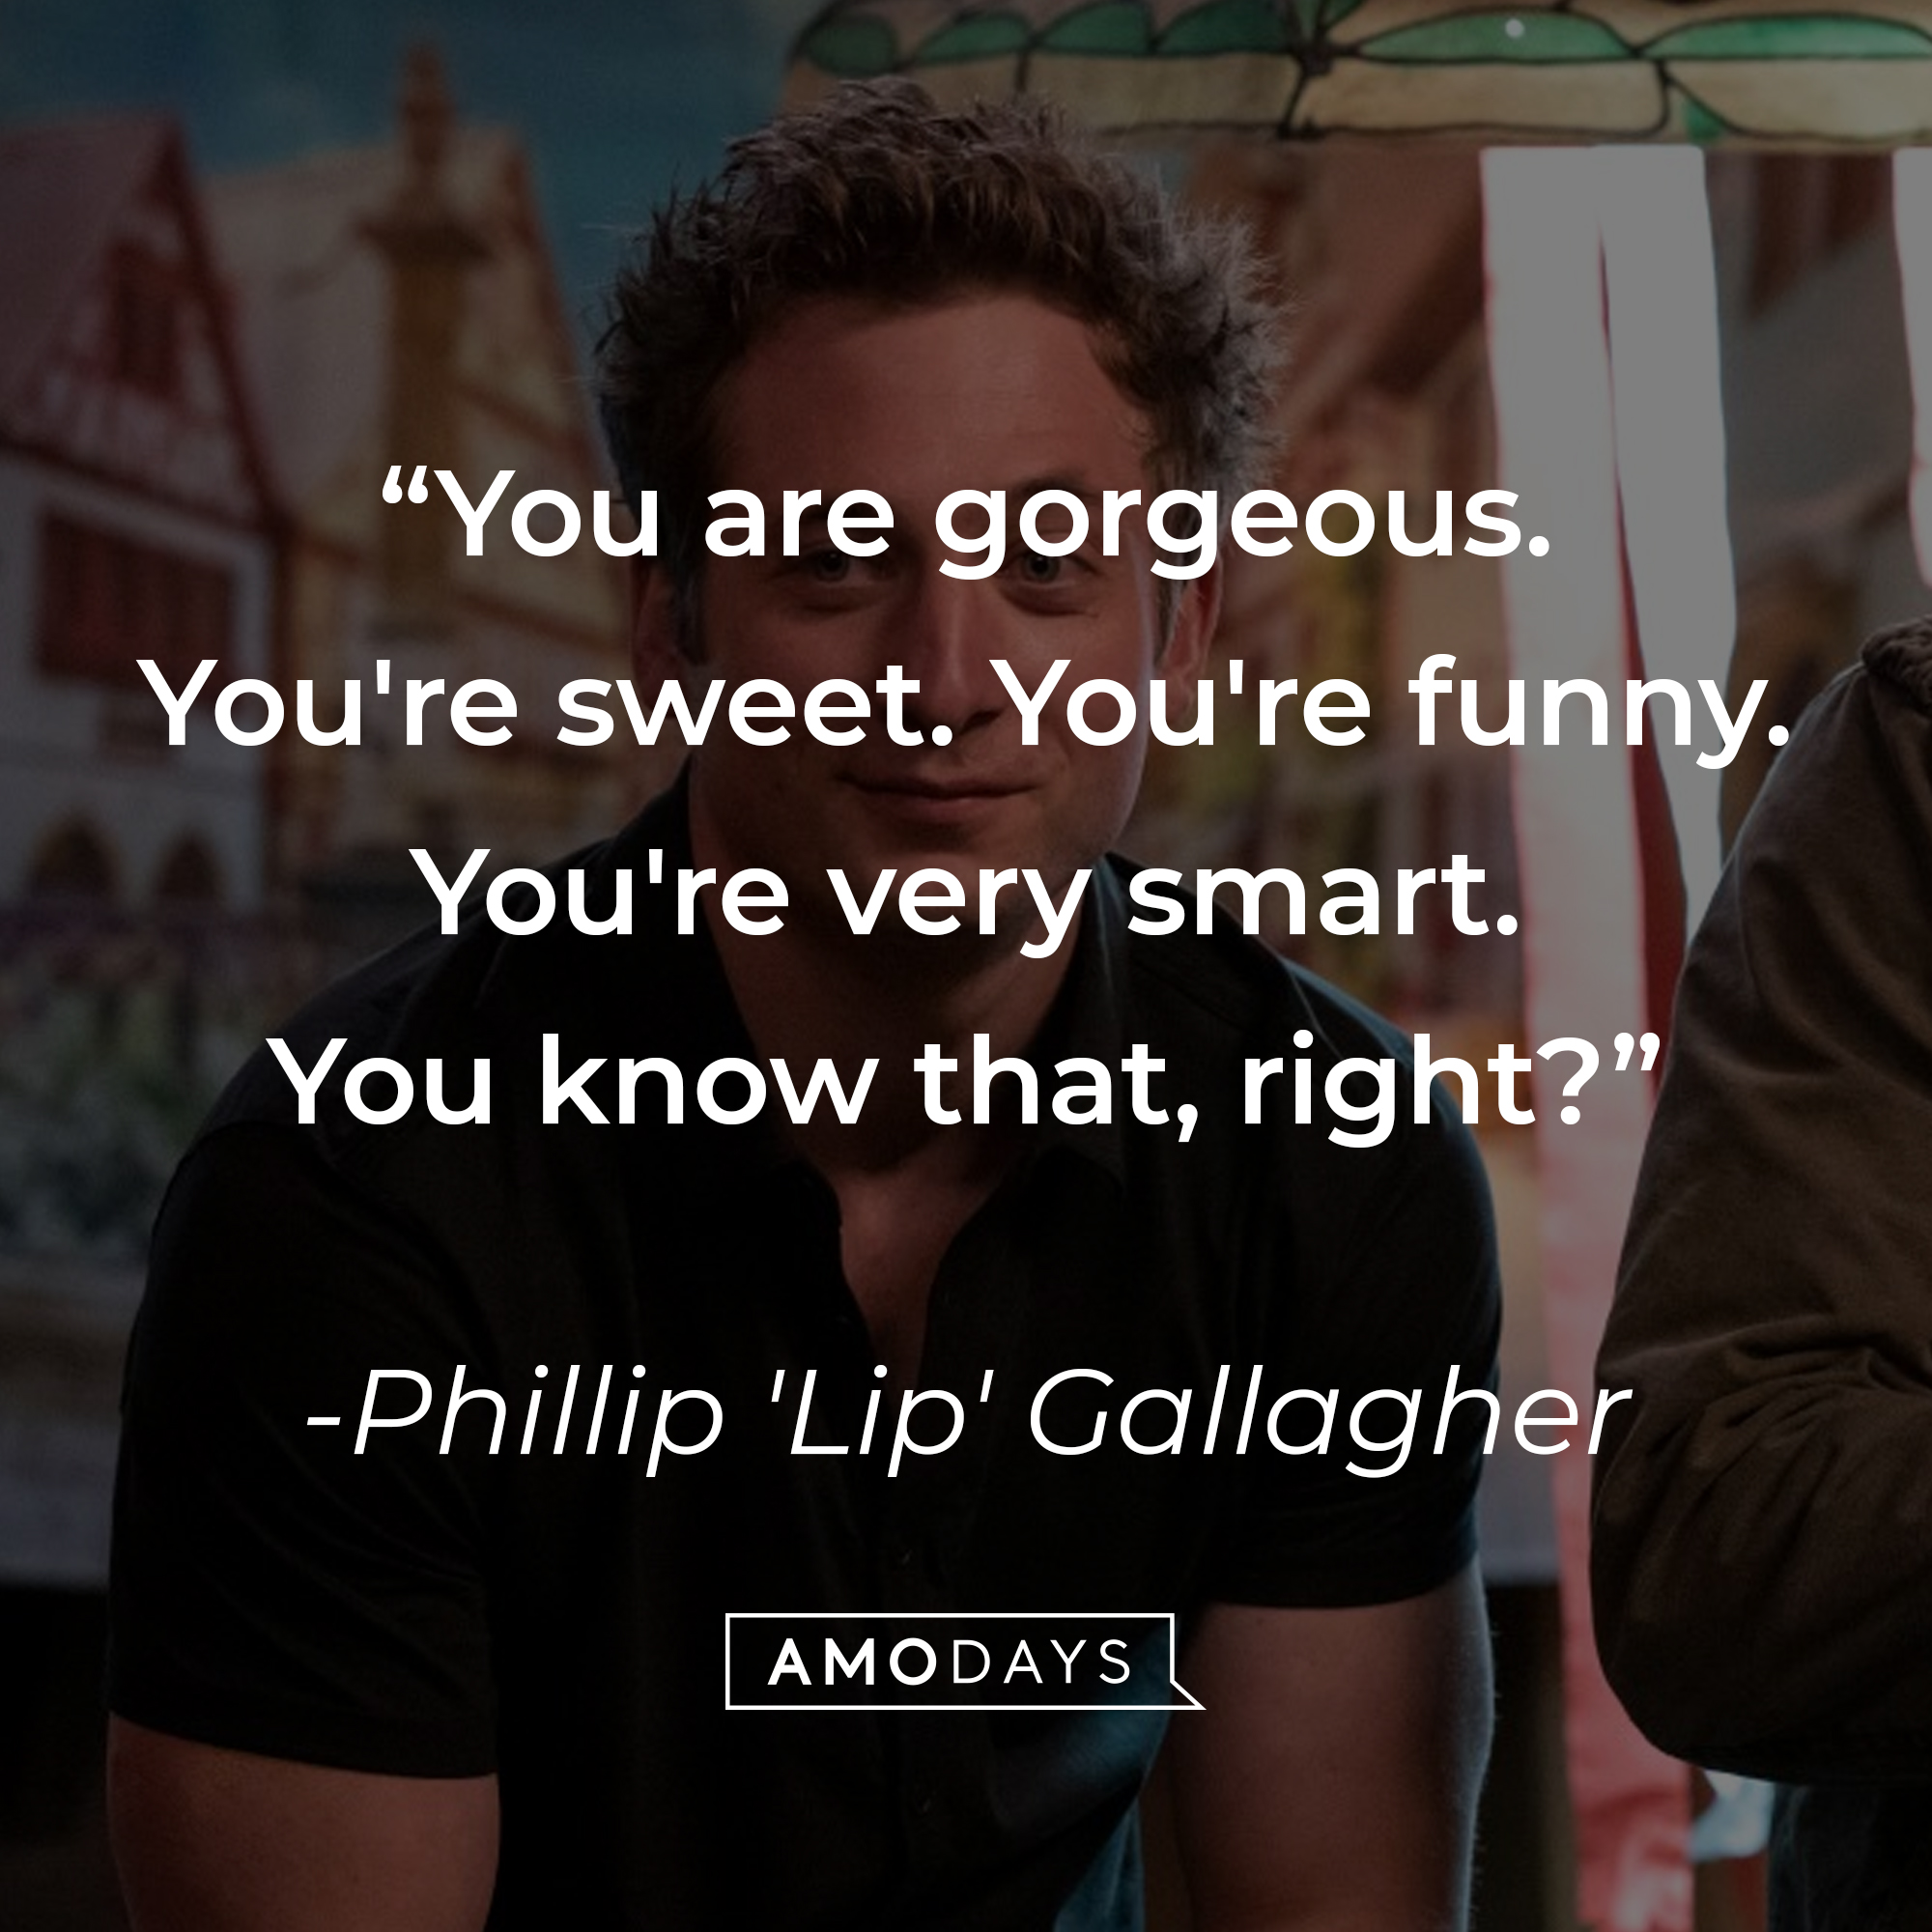 Phillip 'Lip' Gallagher with his quote: “You are gorgeous. You're sweet. You're funny. You're very smart. You know that, right?” | Source: facebook.com/ShamelessOnShowtime